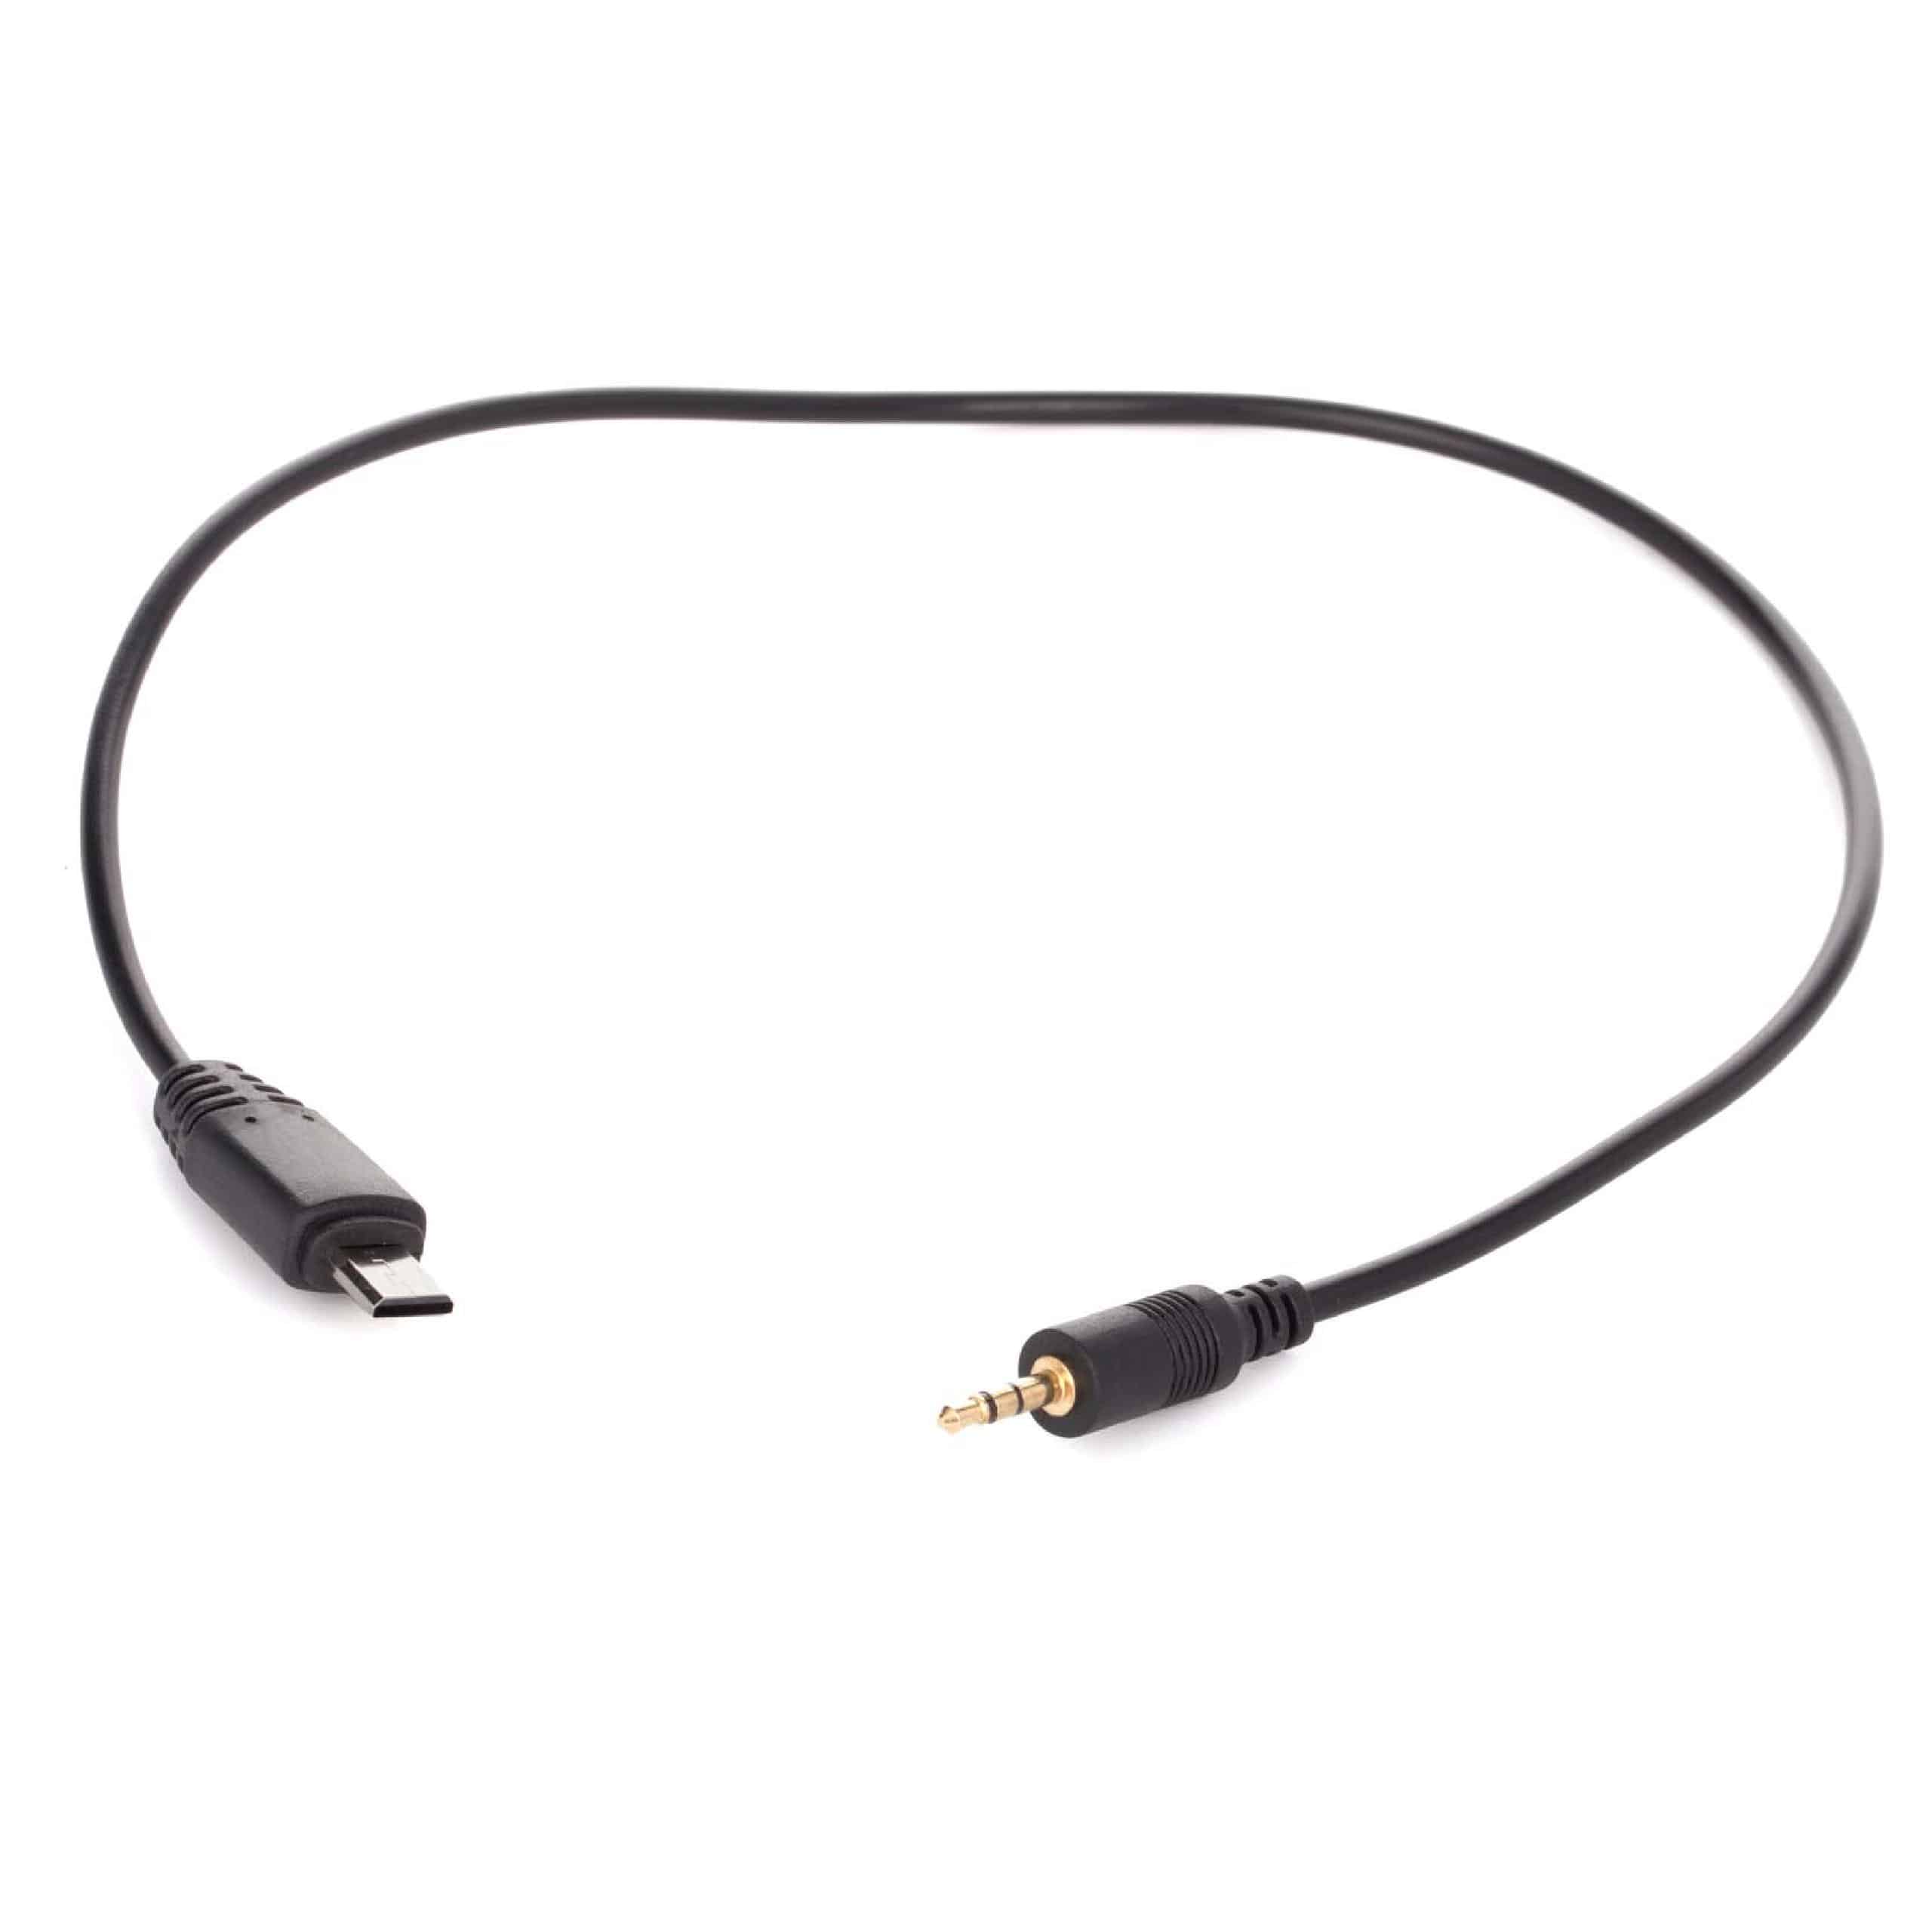 Cable for Shutter Release suitable for NEX-3NL Sony NEX-3NL Camera - 35 cm